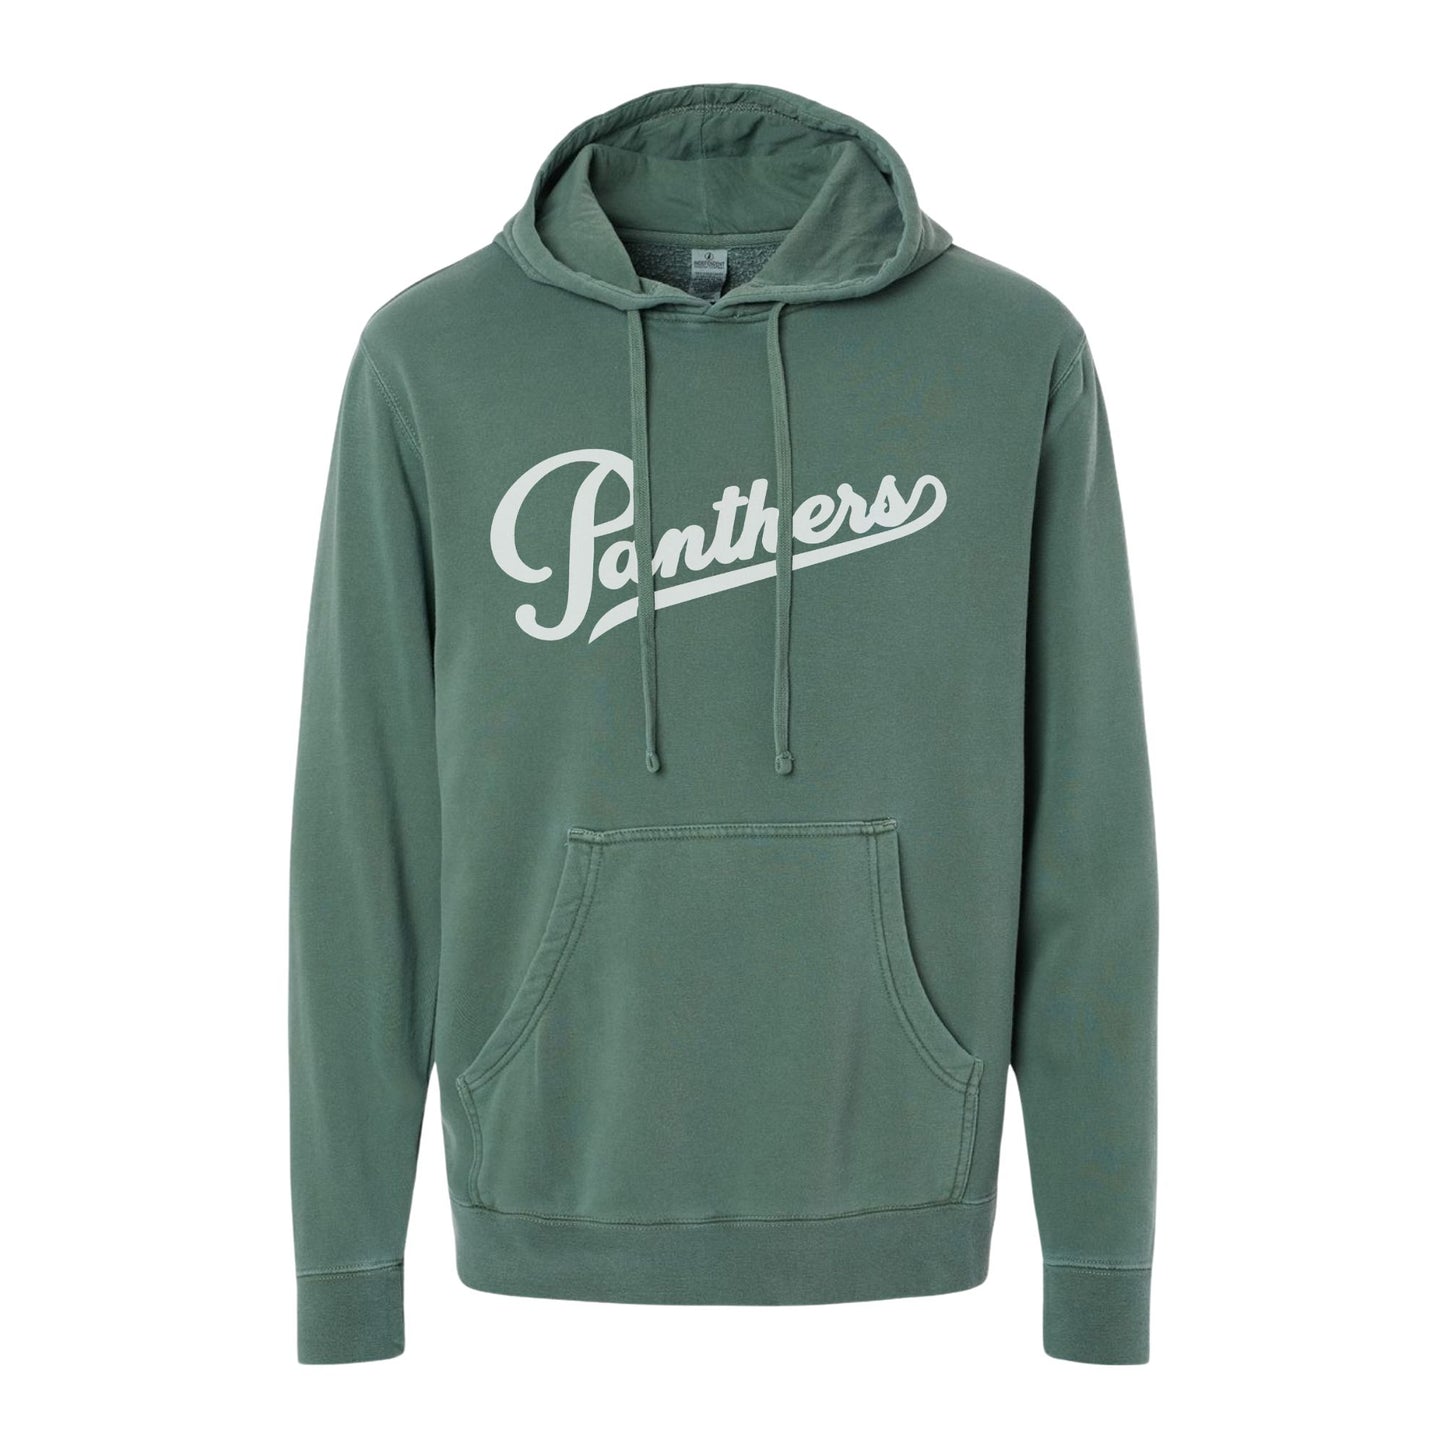 green hooded sweatshirt with printed panthers design